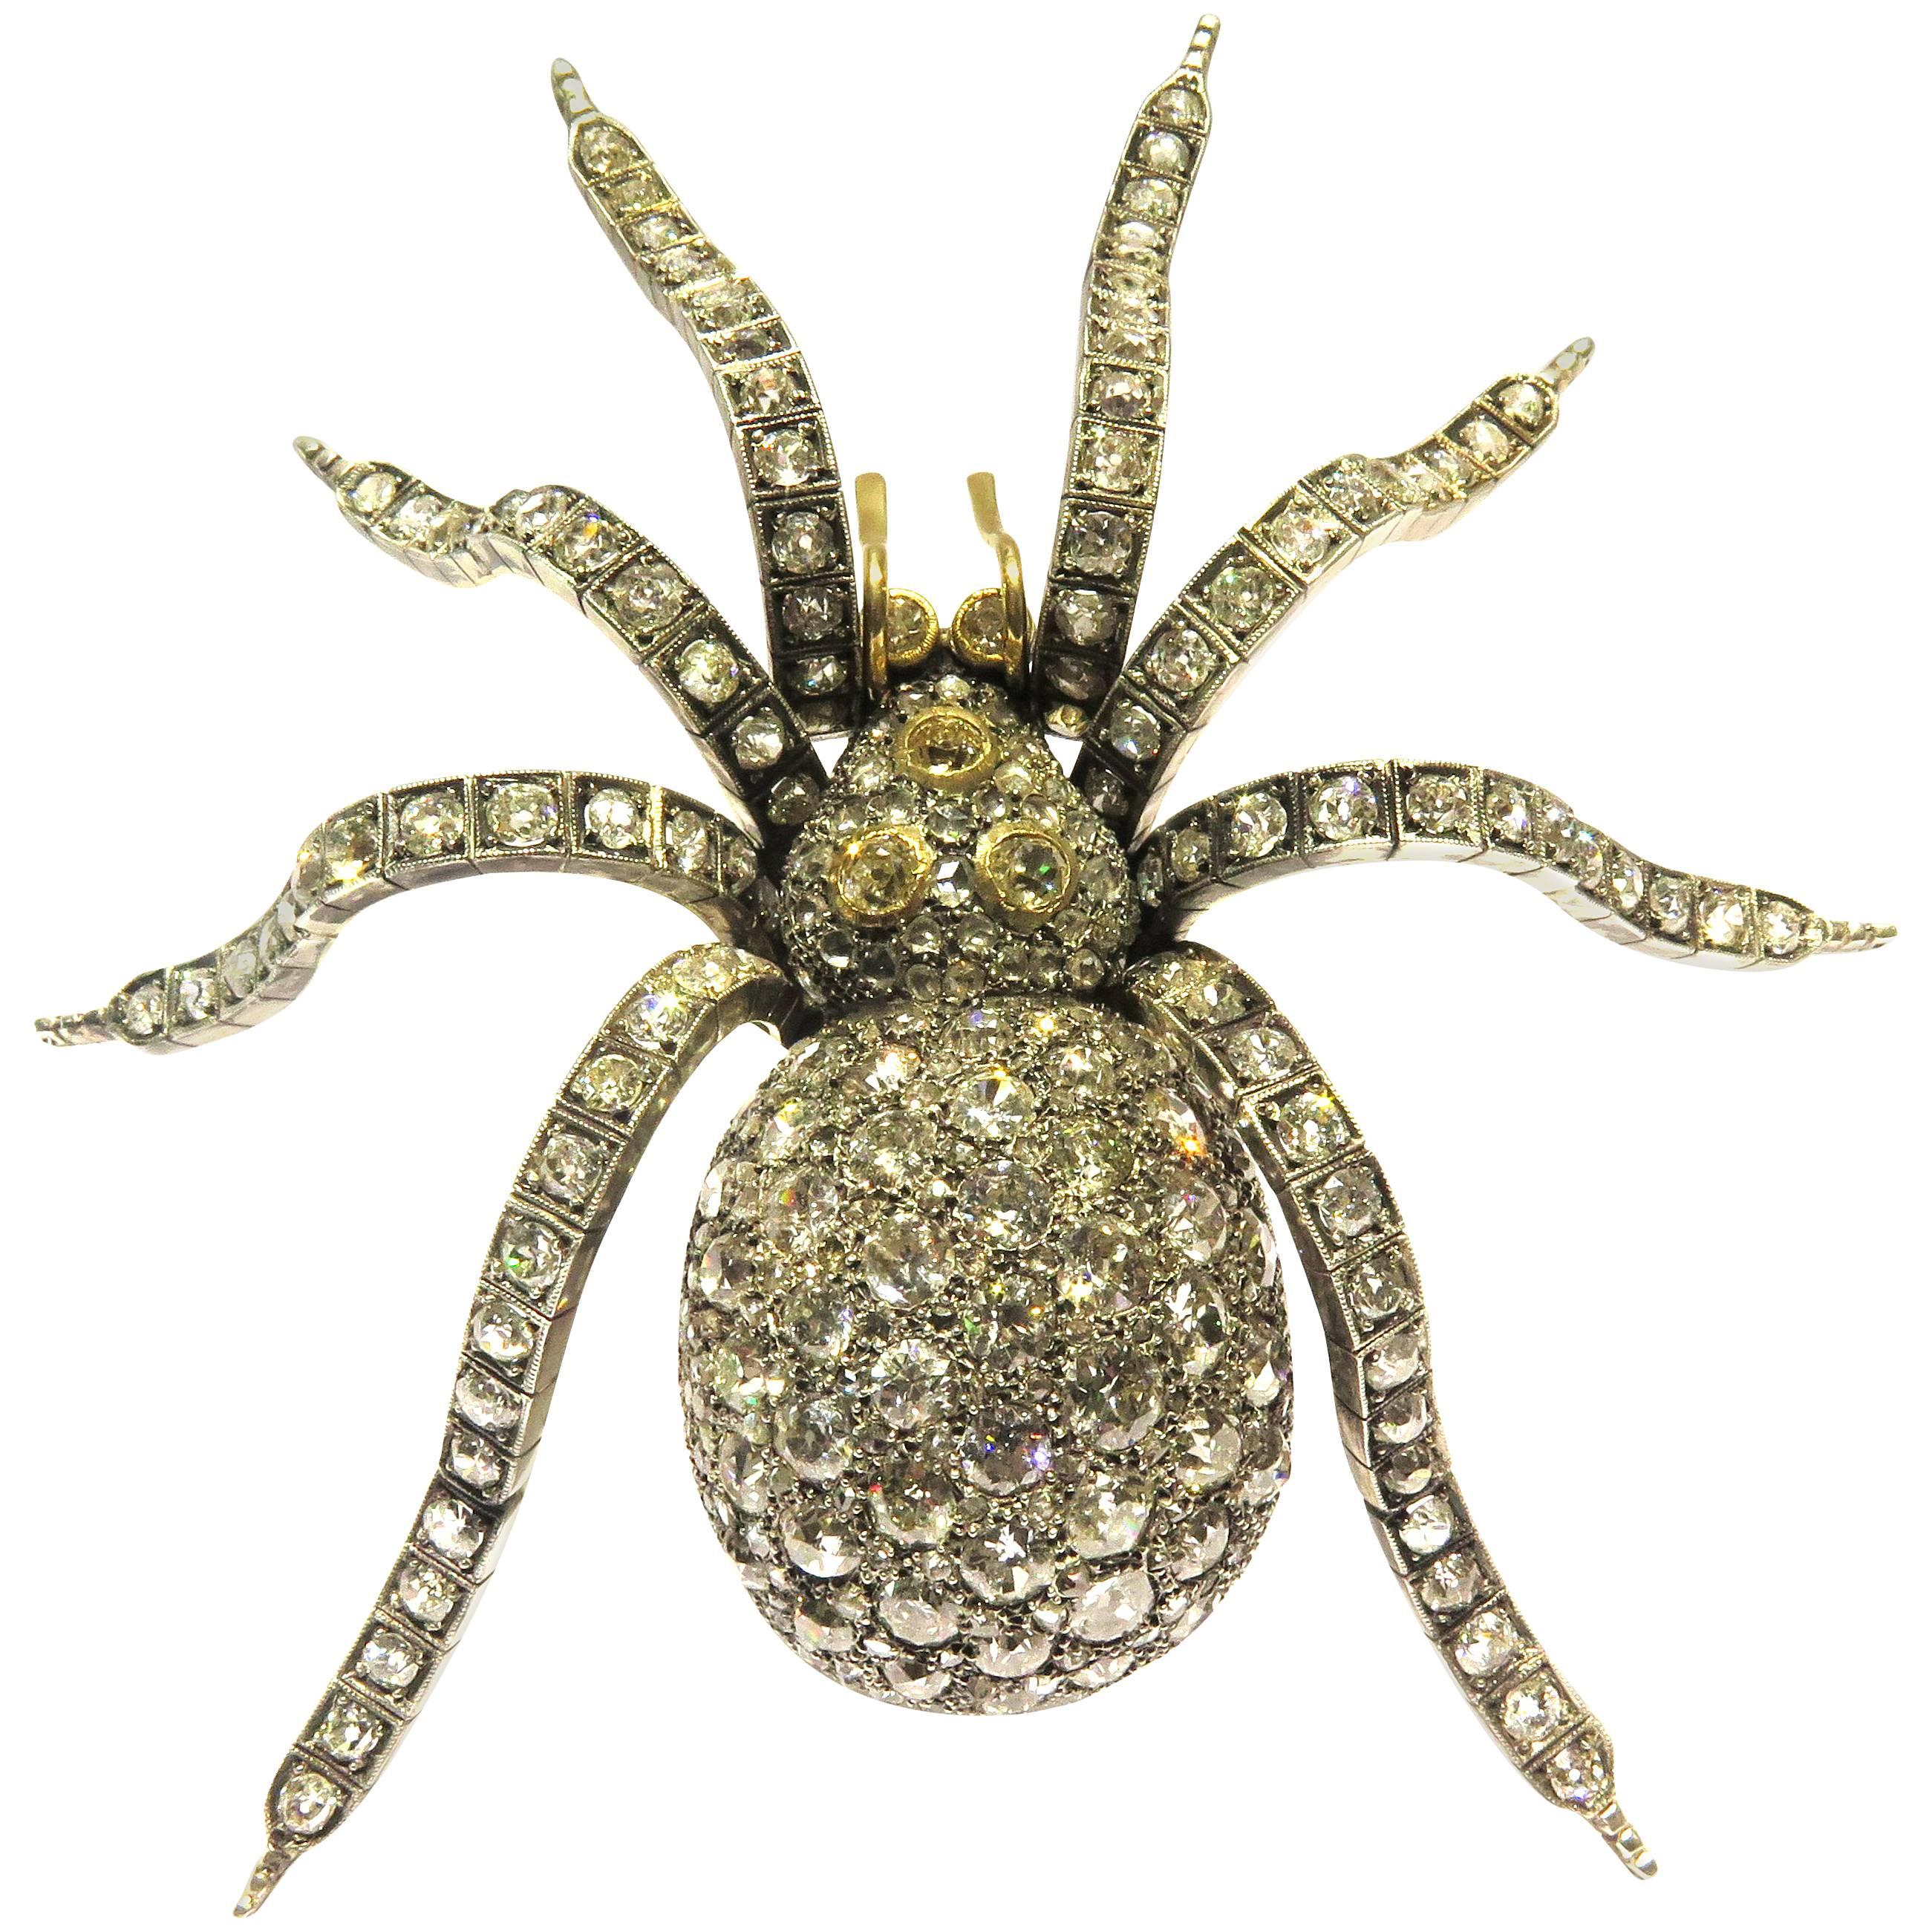 Magnificent Large 43 Carats Diamonds Tremblant Spider Brooch Pin

This amazing spider pin is the largest, most incredable pin I've ever seen! I took this picture of me wearing this pin in image #3 hoping to show the impressive size of the pin. (It